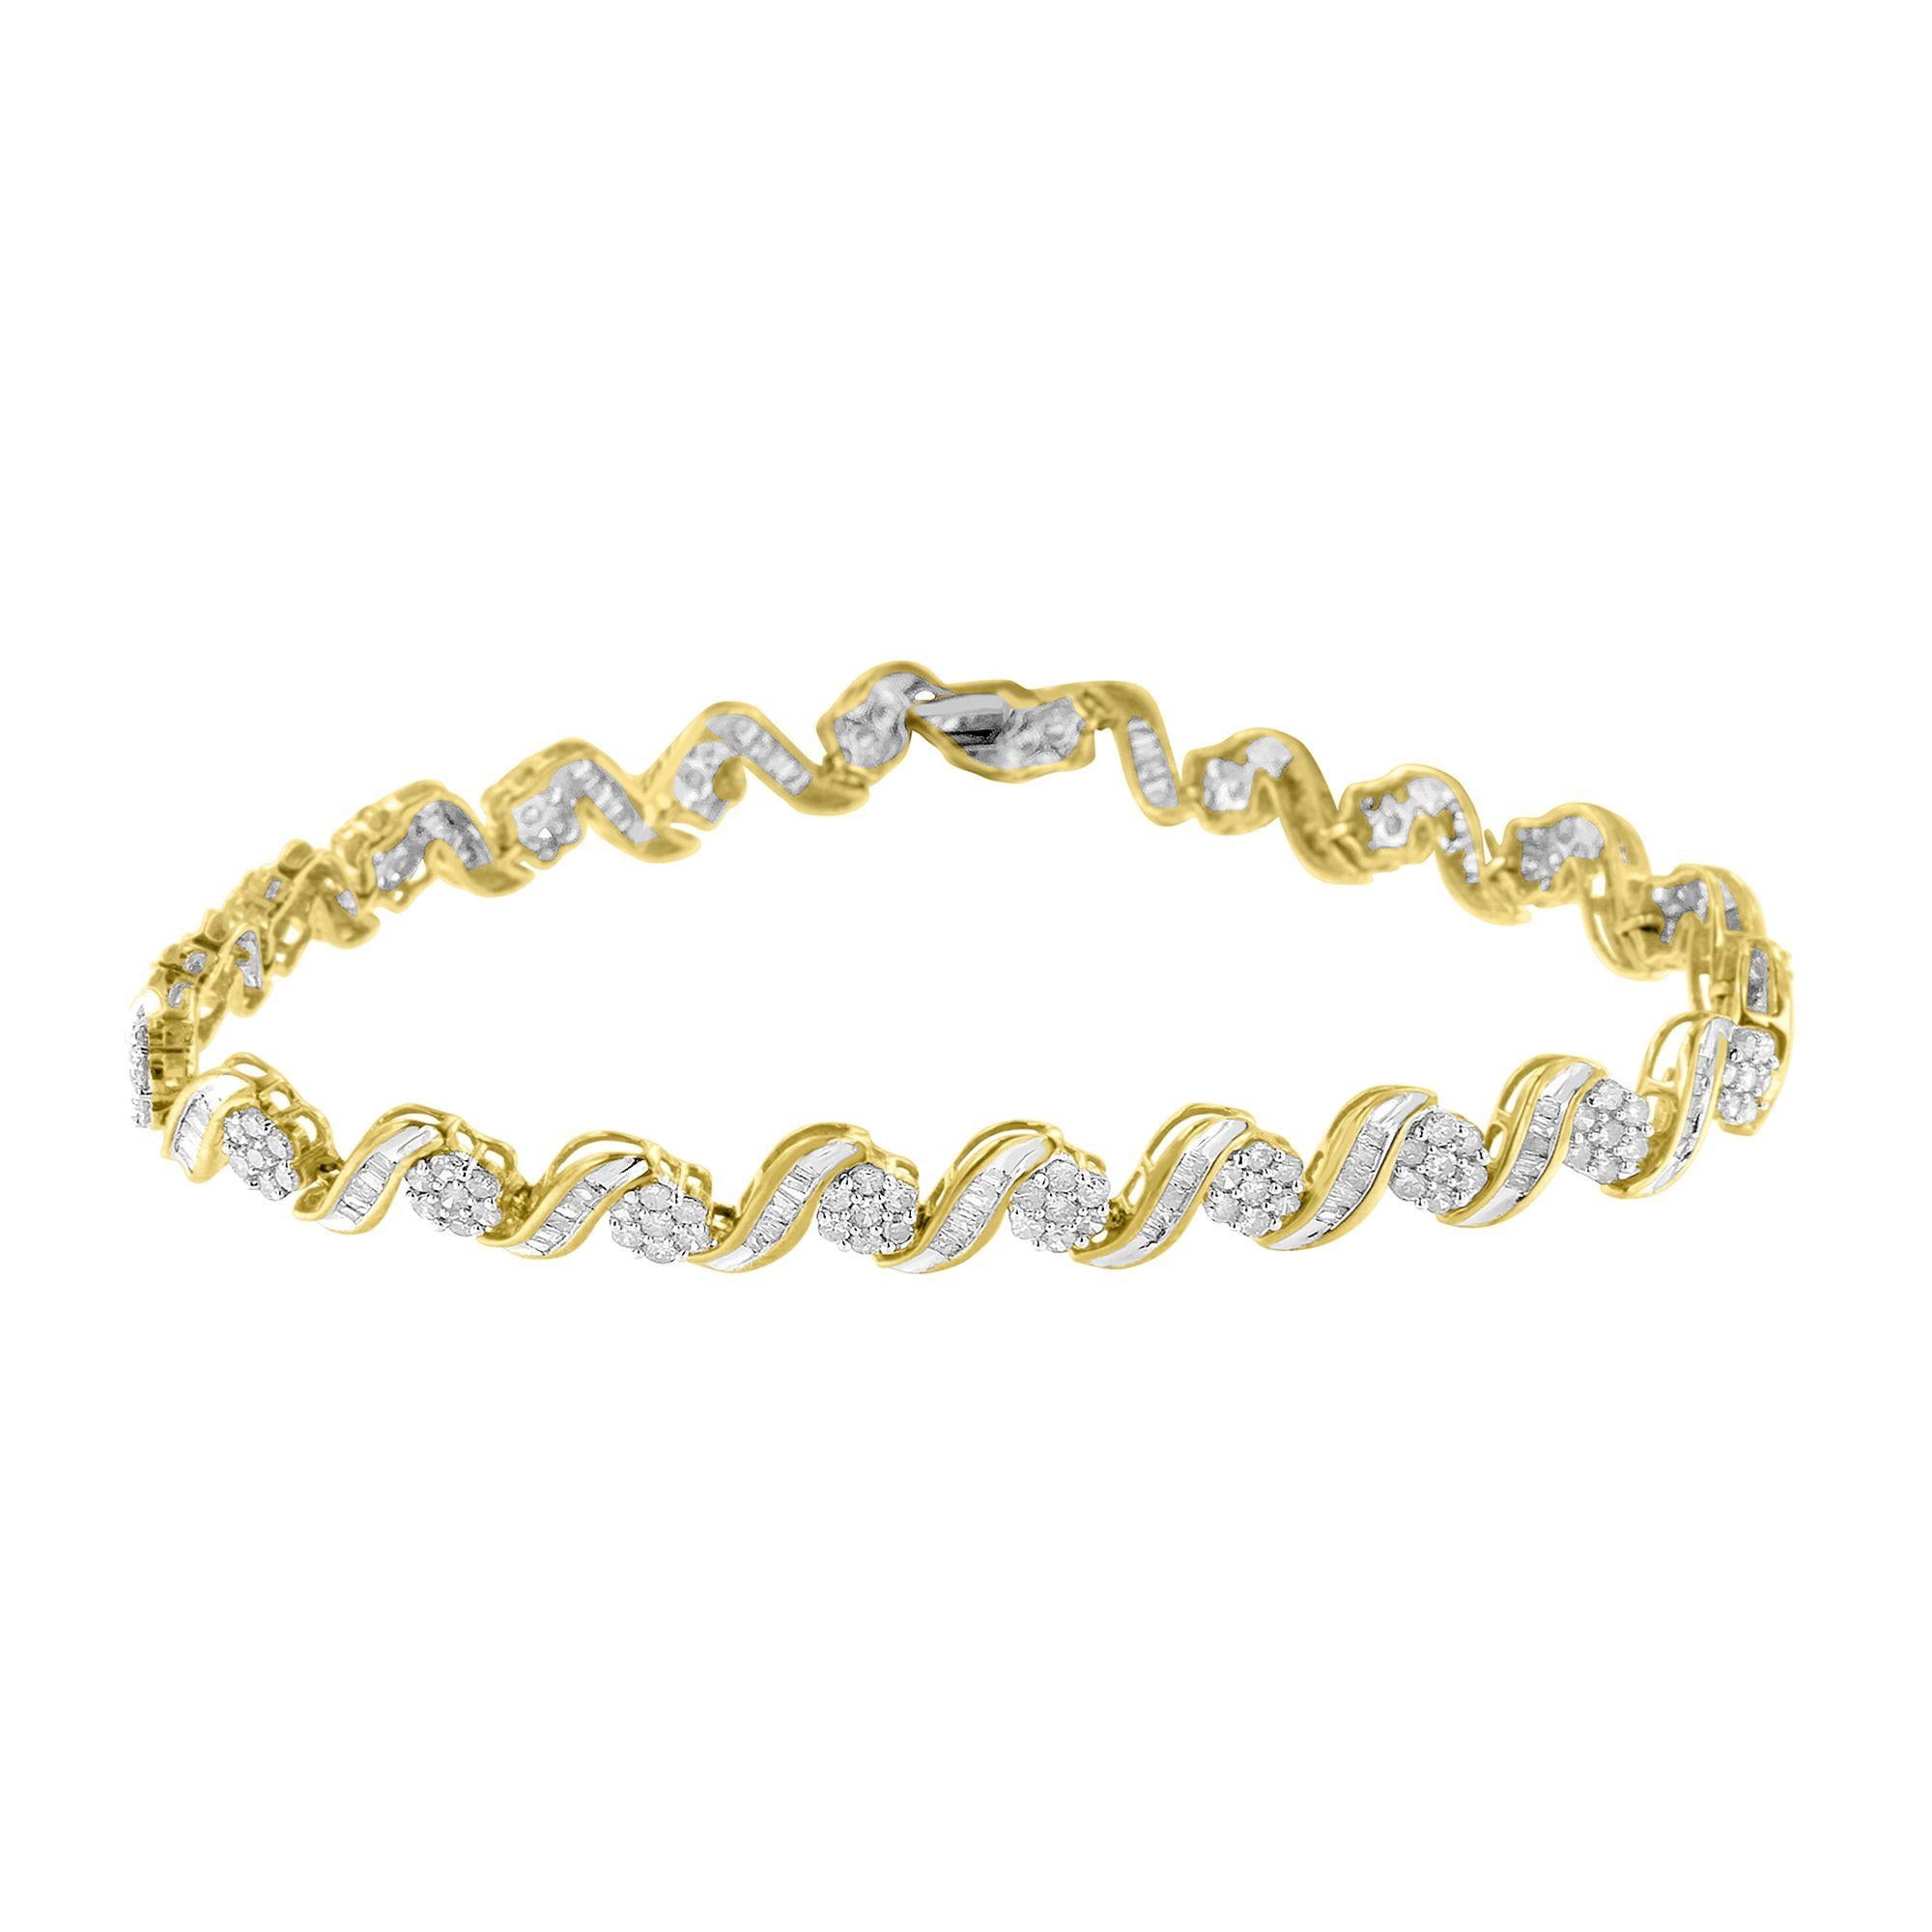 Introducing a truly enchanting piece that will captivate all eyes - a 10k Yellow Gold Diamond Floral Link Bracelet. Crafted with exquisite attention to detail, this bracelet features a mesmerizing array of 264 natural diamonds, totaling an